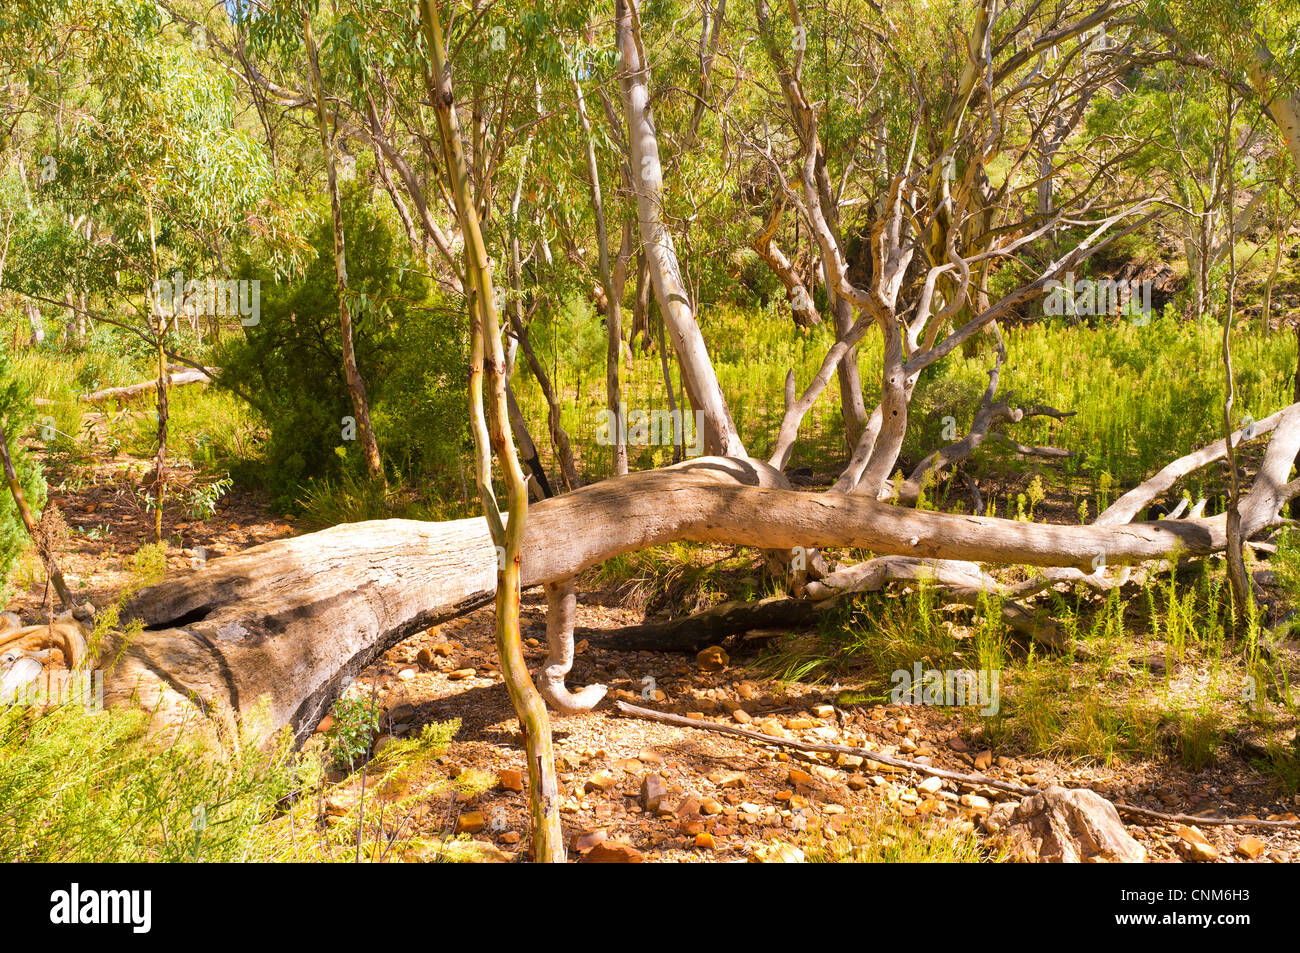 Dead tree fallen over Mambray Creek at Mambray Creek in Mount Remarkable National Park in the Southern Flinders Ranges in South Australia Stock Photo